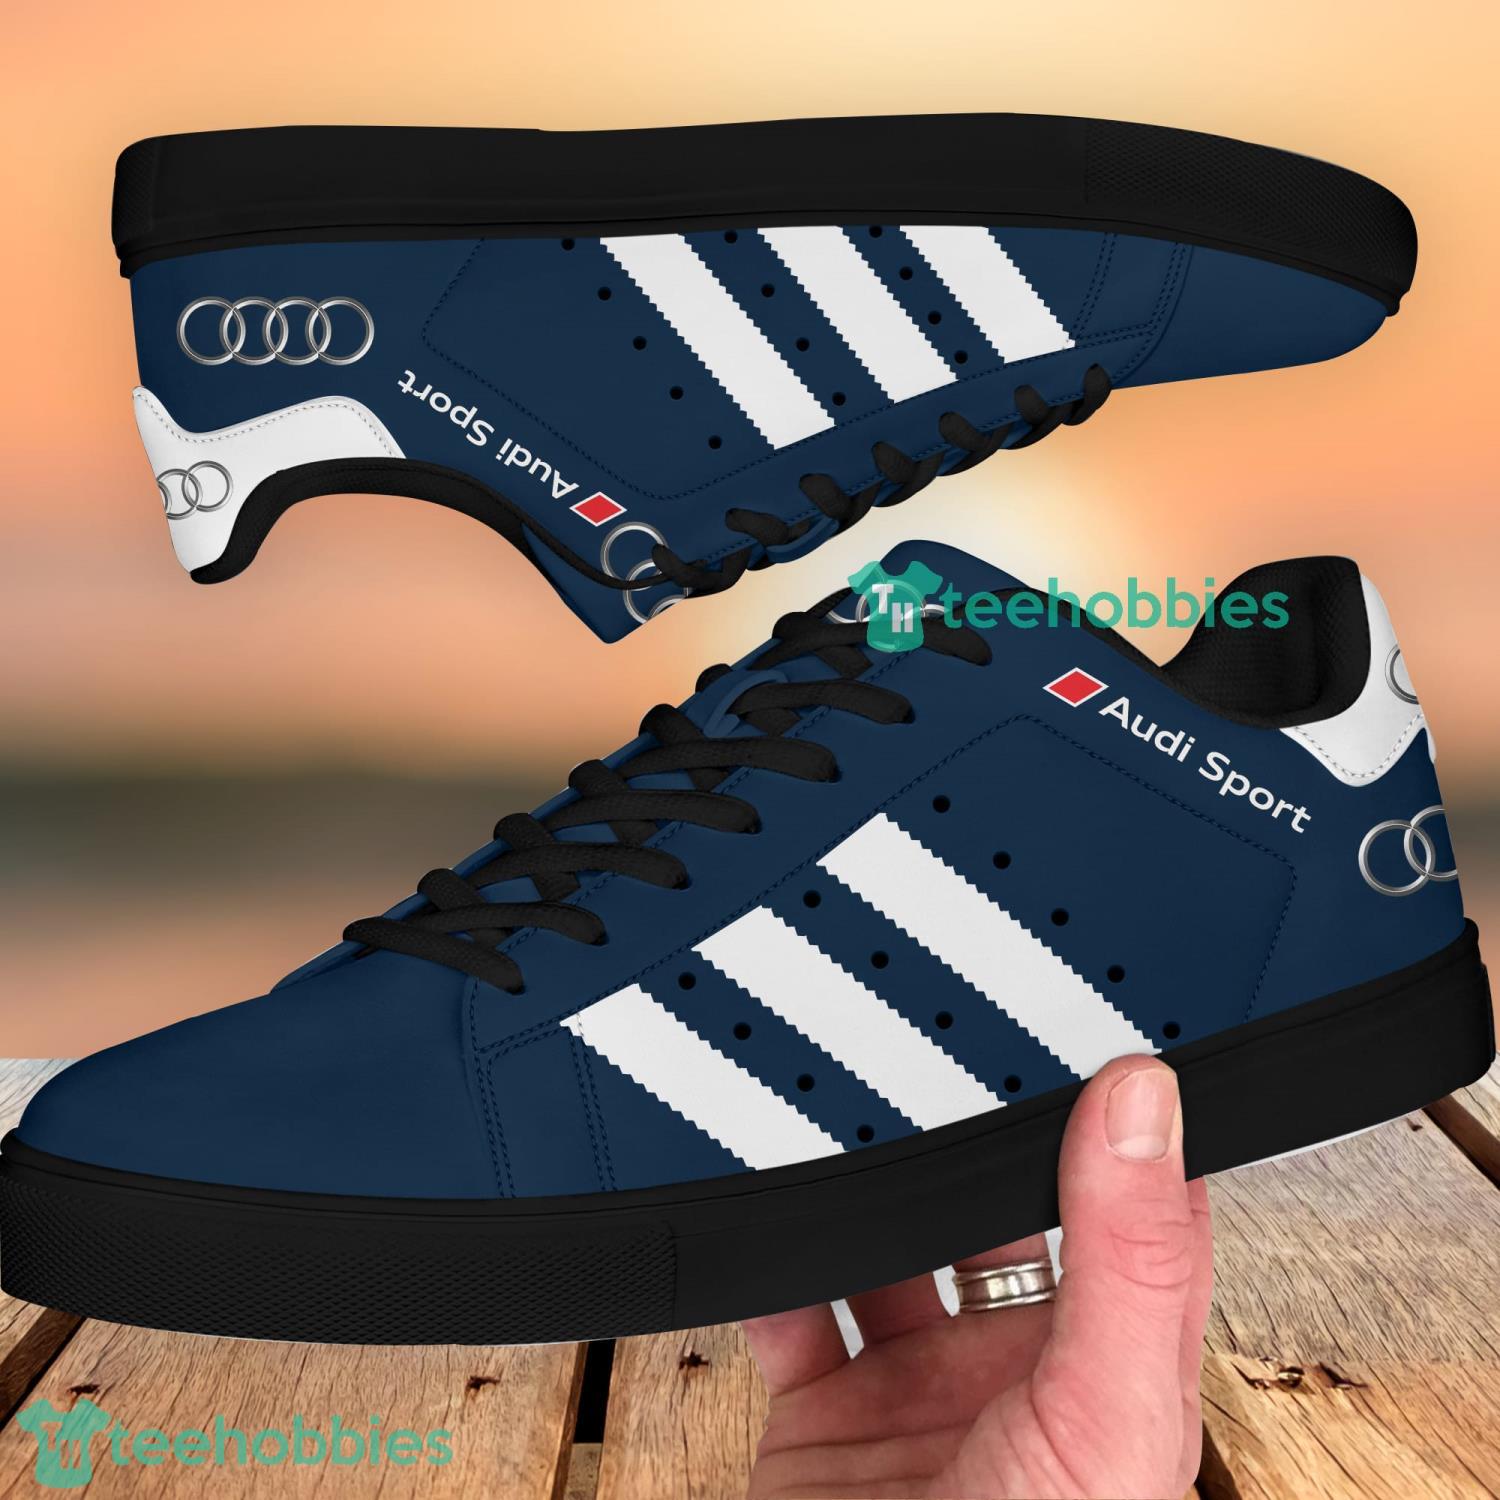 Audi Sport Stan Smith Low Top Skate Shoes Sneakers For Men And Women Ver 11 Product Photo 4